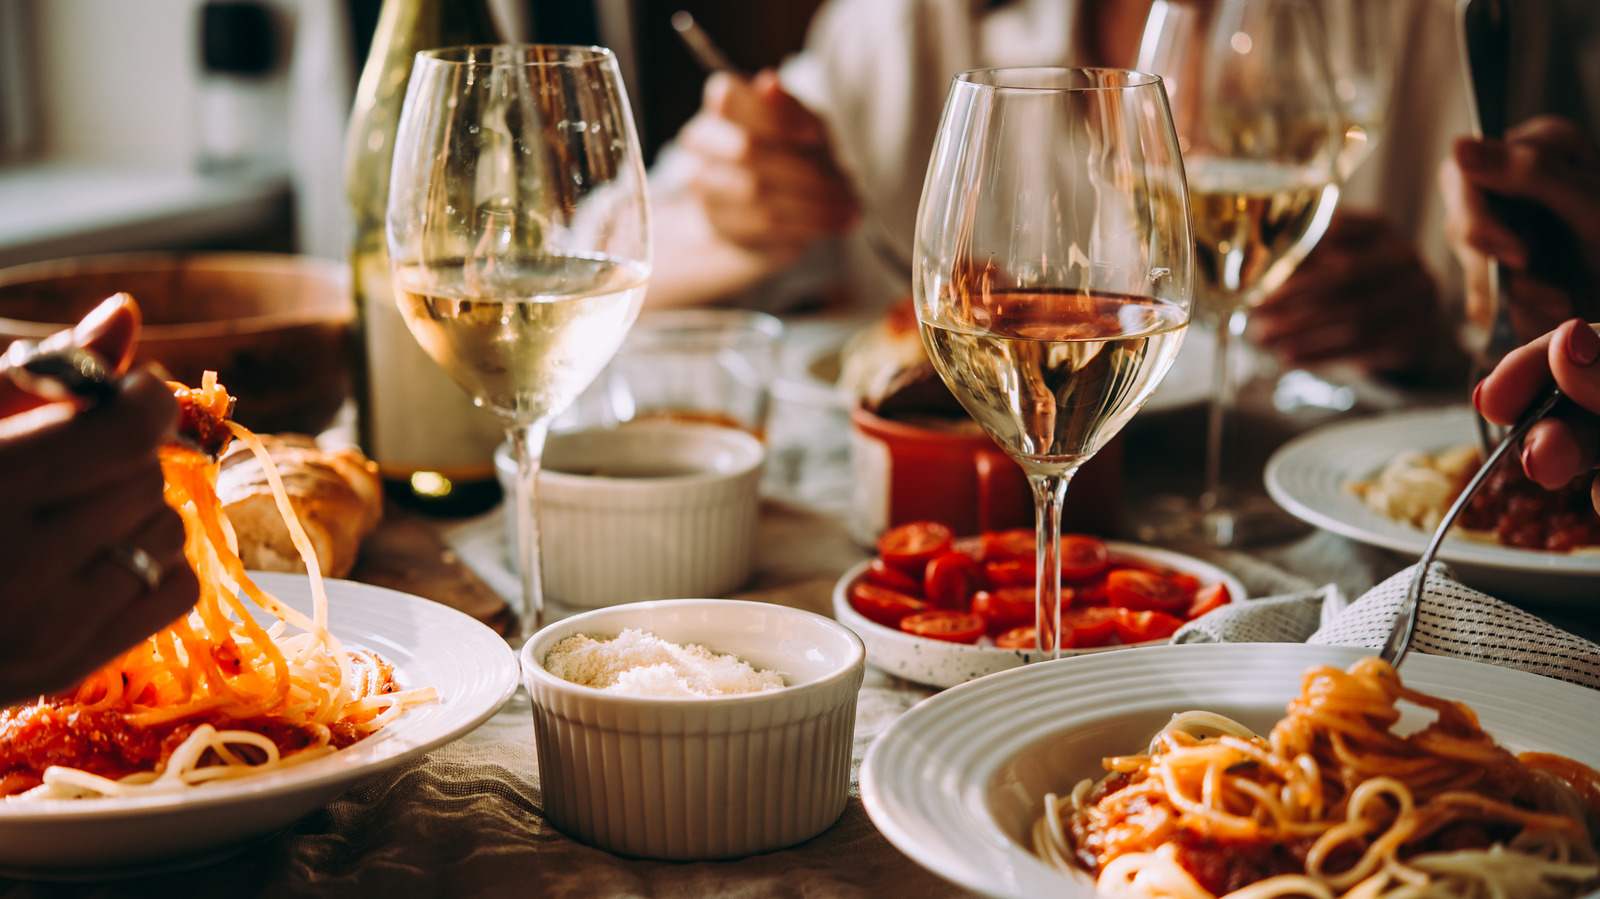 Bring Your Own Wine To Olive Garden And Save A Ton – The Daily Meal